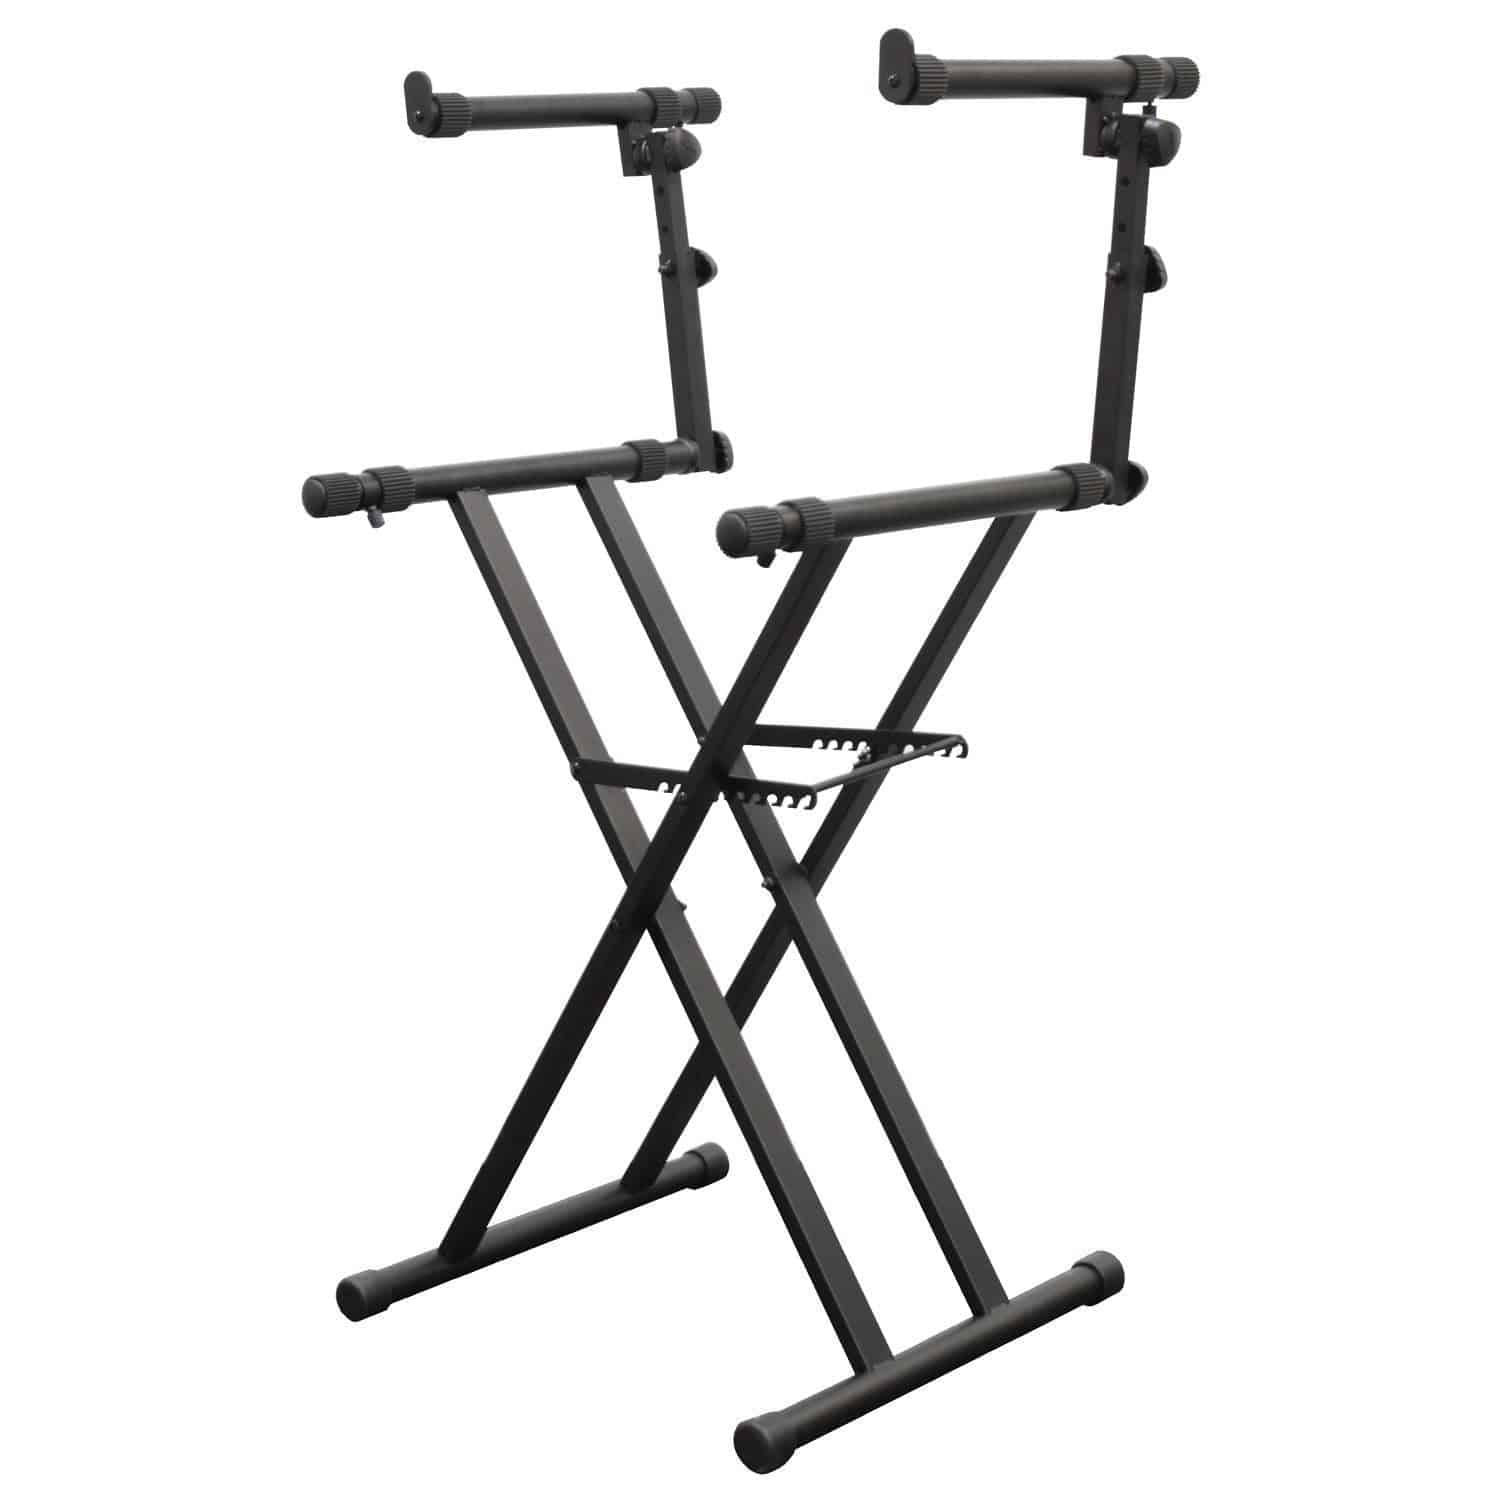 Odyssey LTBXS2, Two Tier X-Stand For DJ Coffins and Controller Cases - Black - Hollywood DJ